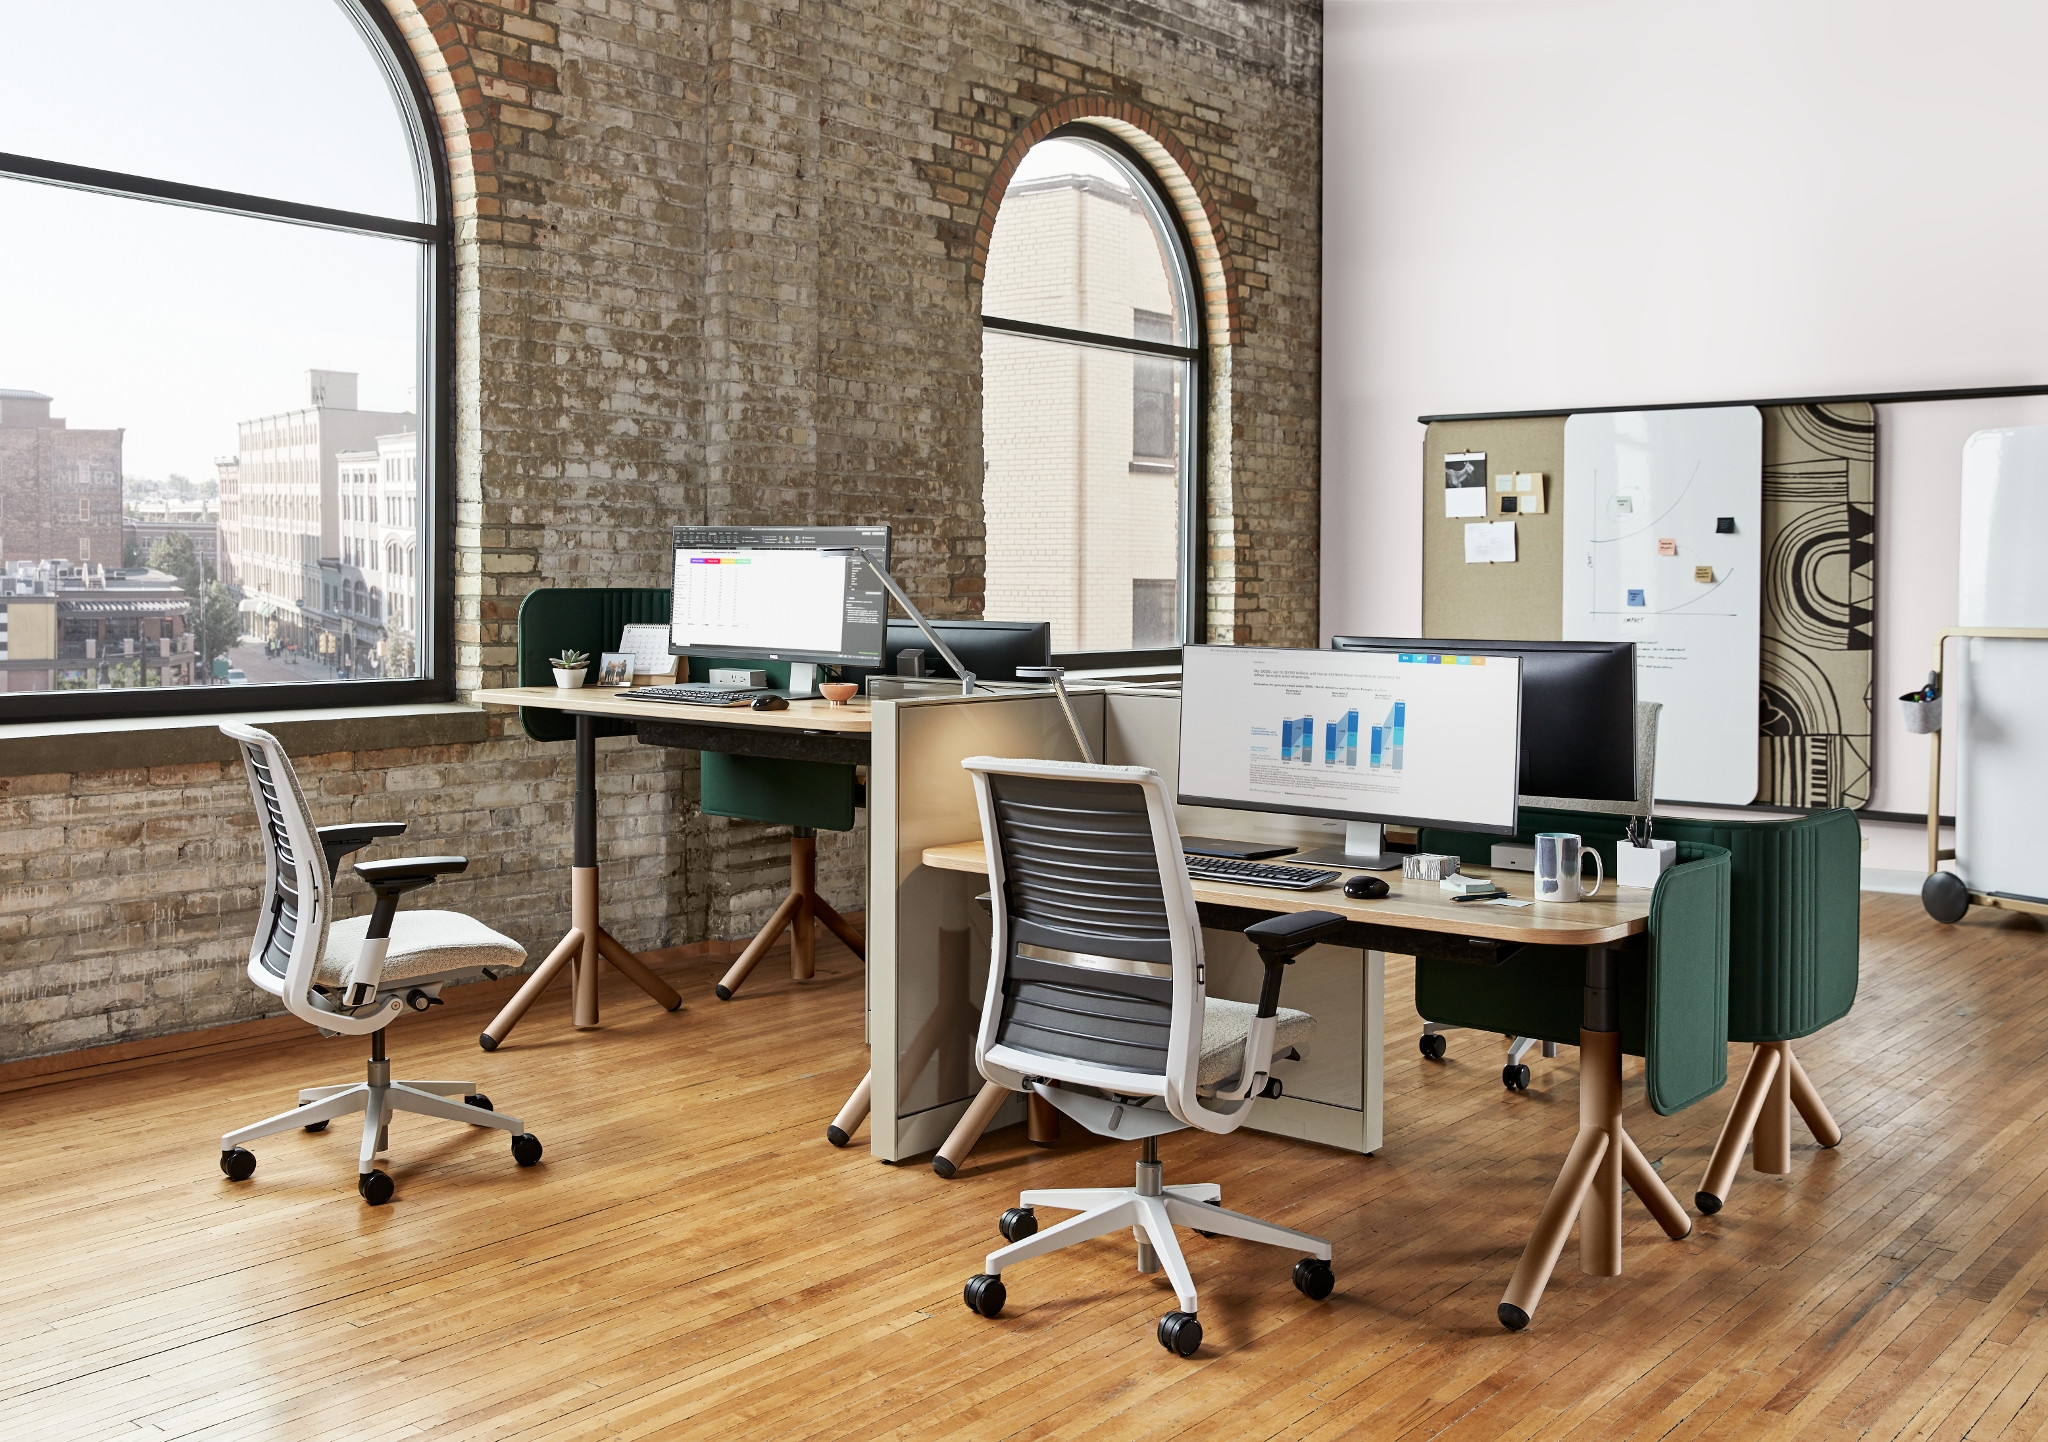 An image that demonstrates the height-adjustable feature of Steelcase work desks.